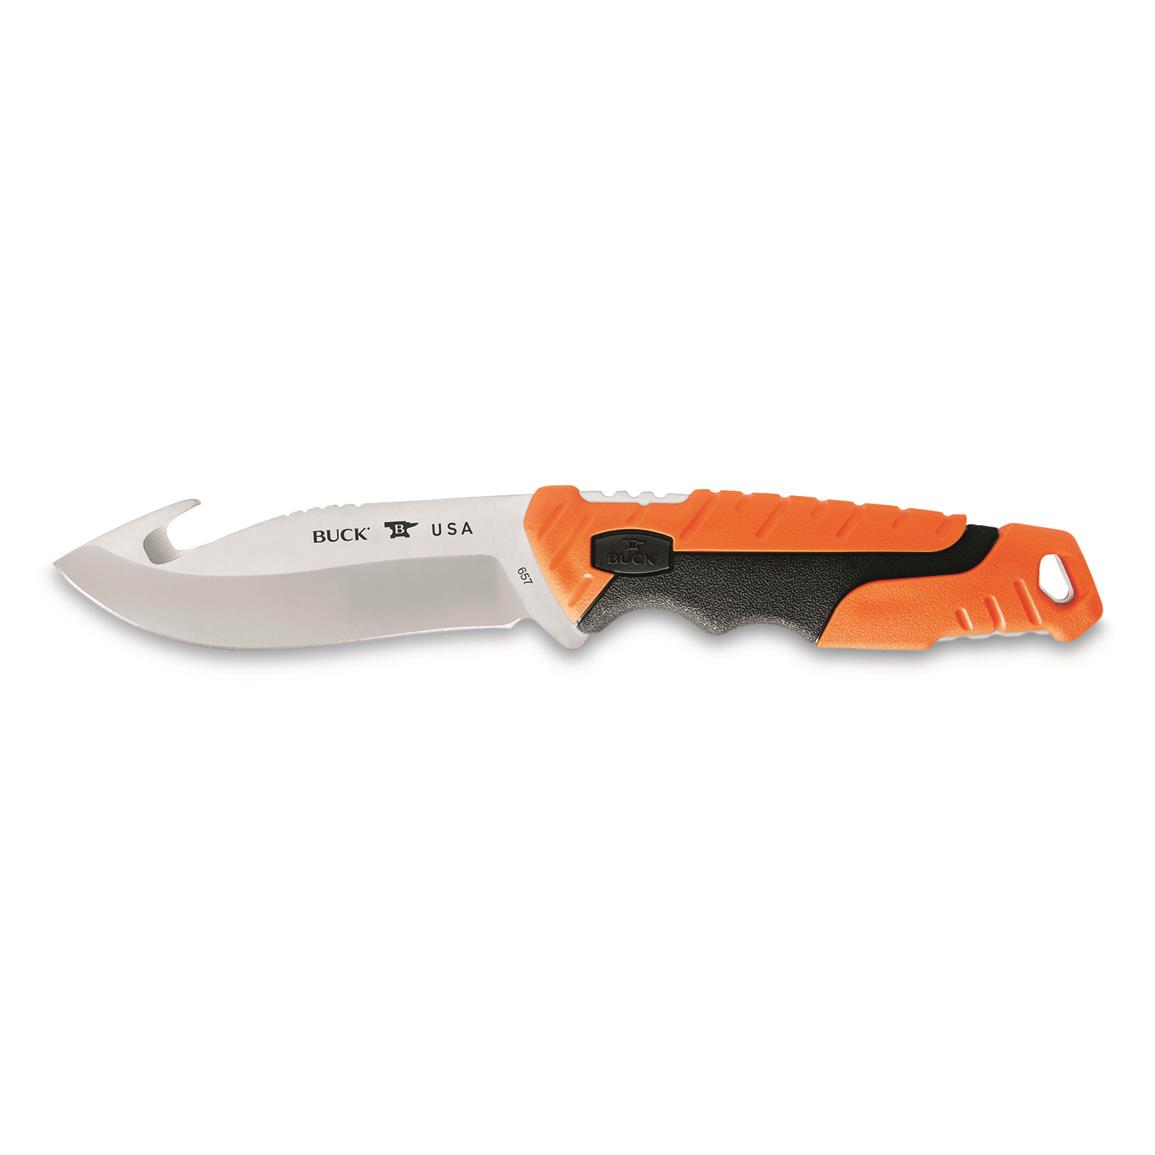 Bubba 7 E-FLEX Replacement Blade - 734464, Fillet Knives at